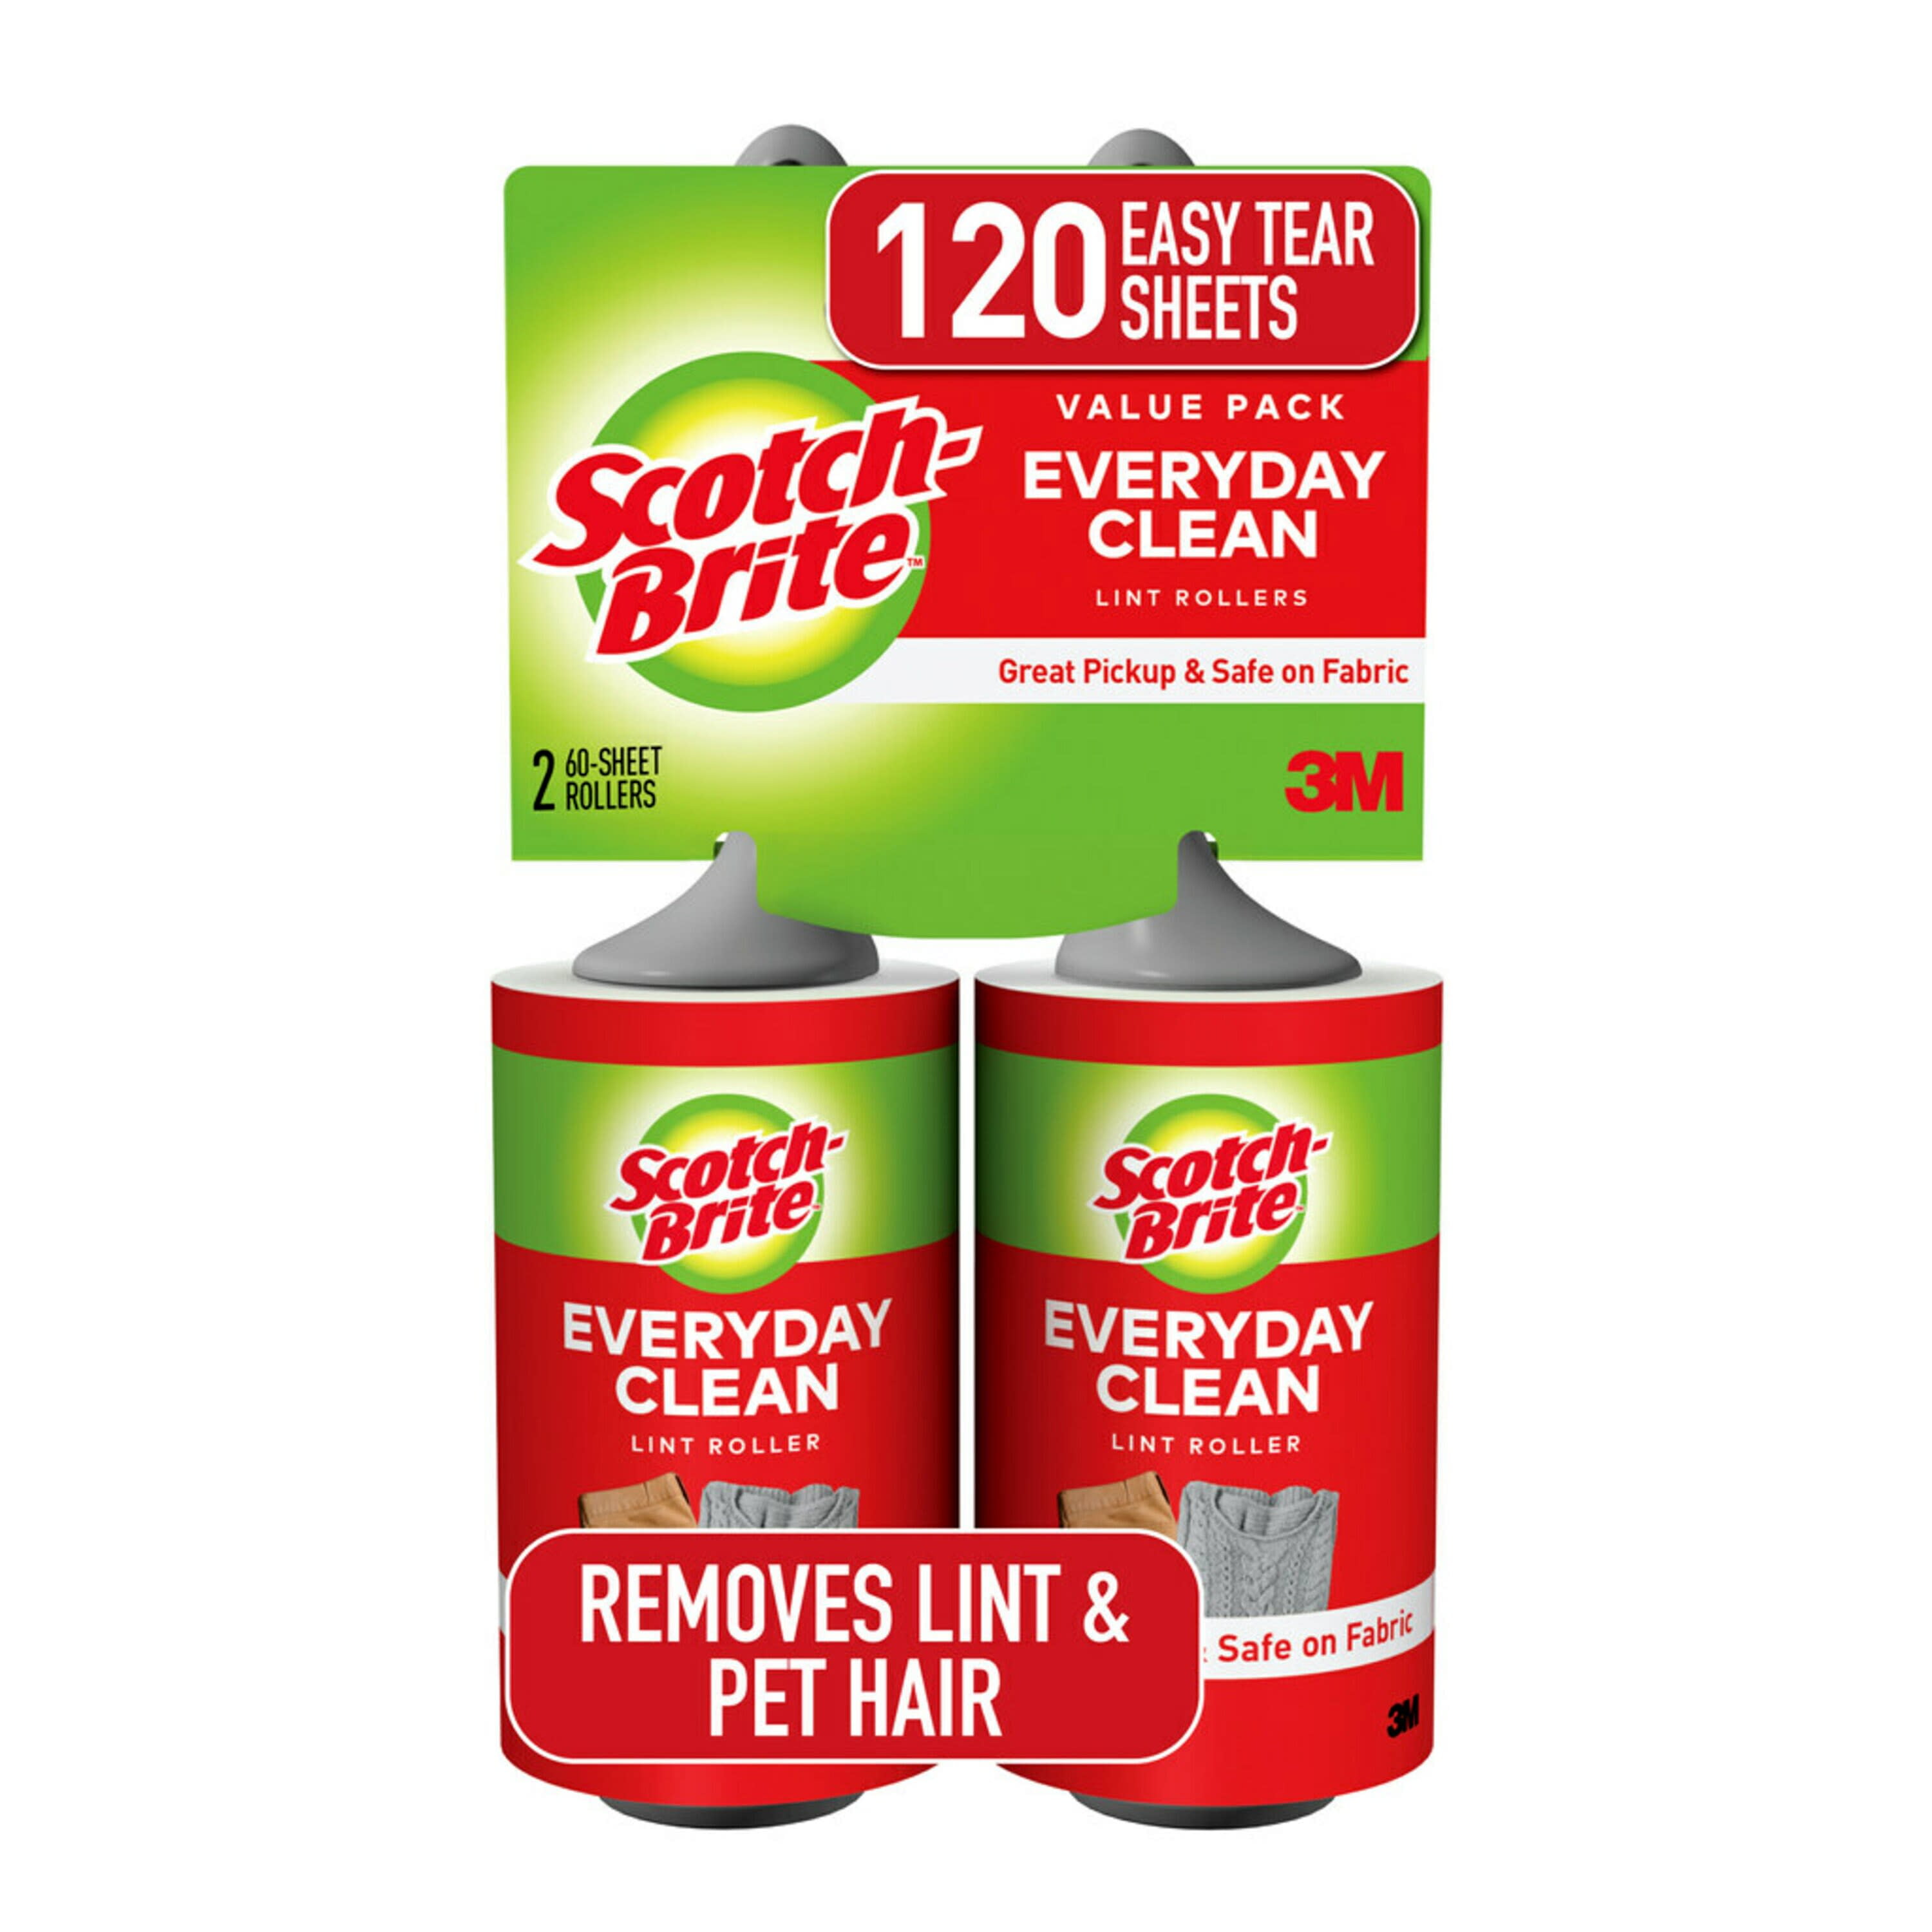 Scotch-Brite Lint Roller, 2 Rollers, 60 Sheets Per Roller, 120 Sheets Total